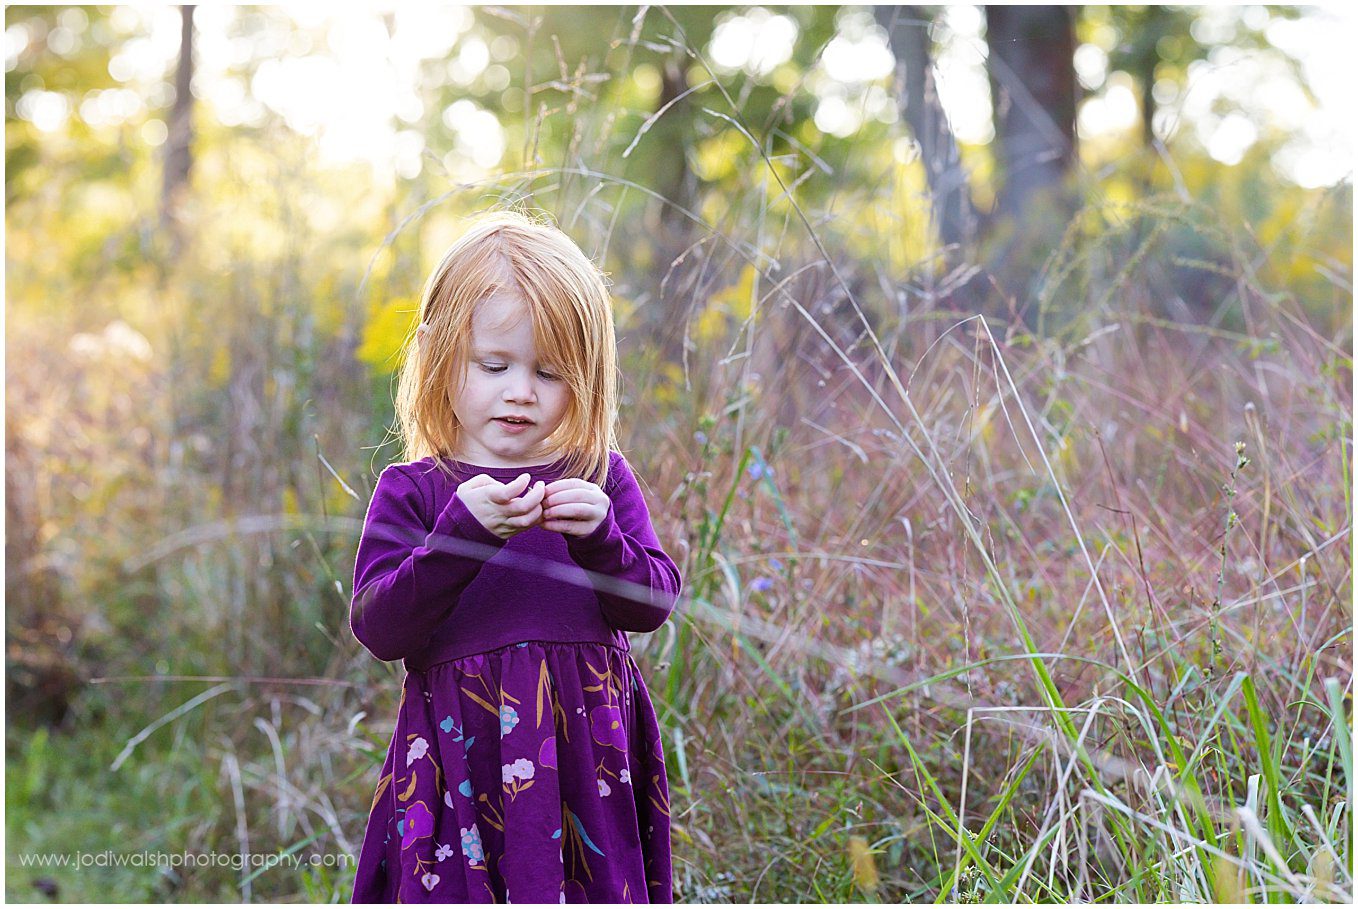 image of a little girl with red hair. She's standing in some tall grasses as the sun is setting behind her and she's looking down at a flower in her hands.